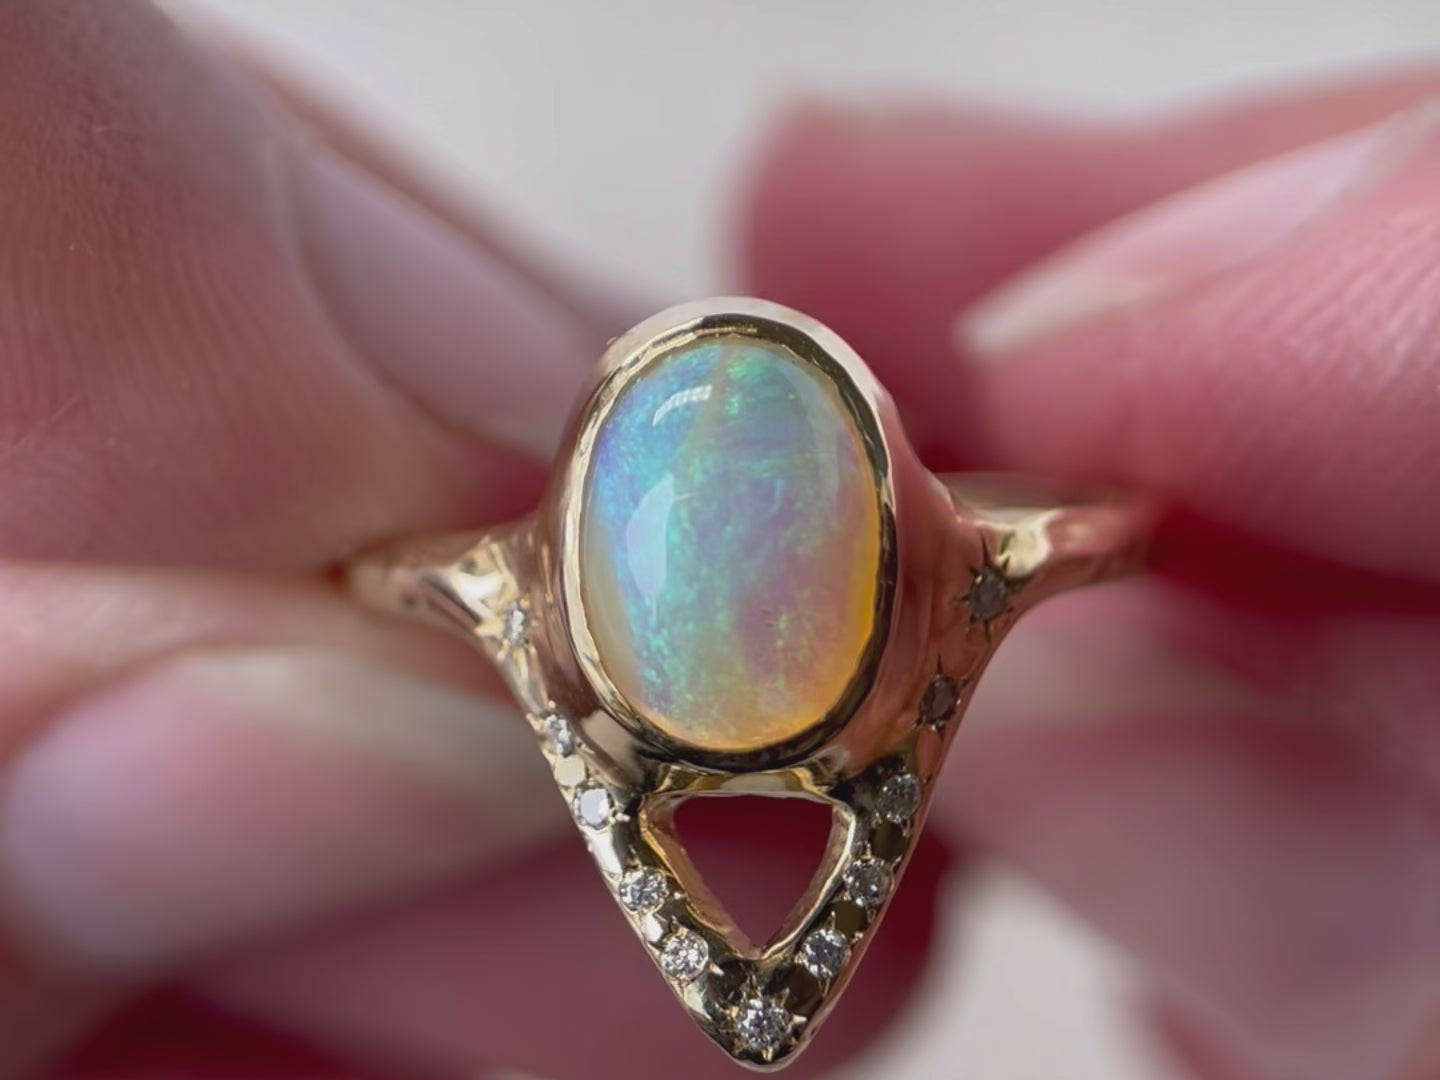 A close up video of an elegant opal ring featuring a V-shaped design adorned with sparkling diamond accents.